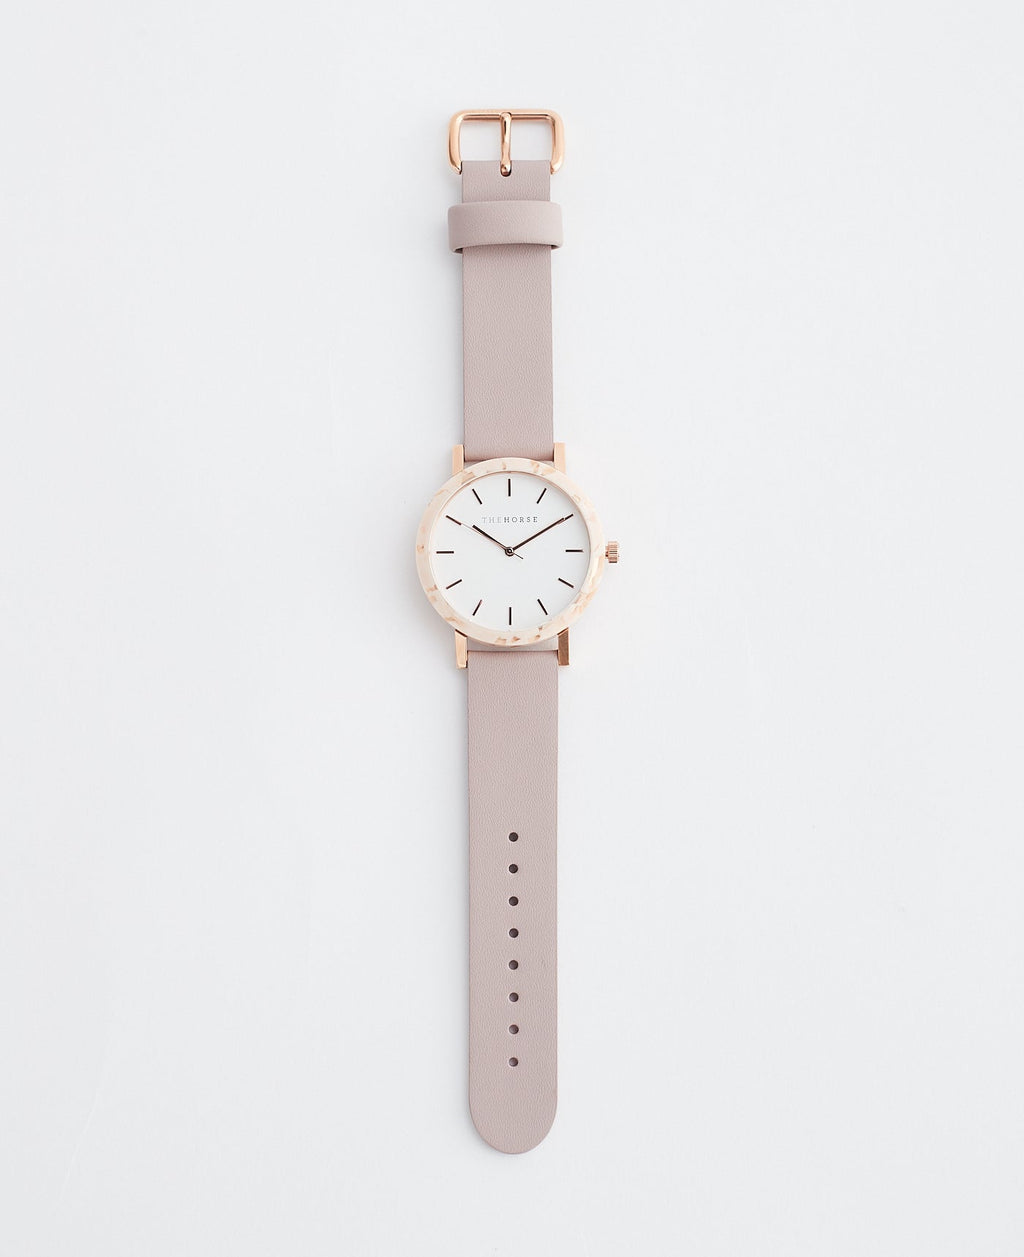 The Horse Watch Resin Peach Speckle